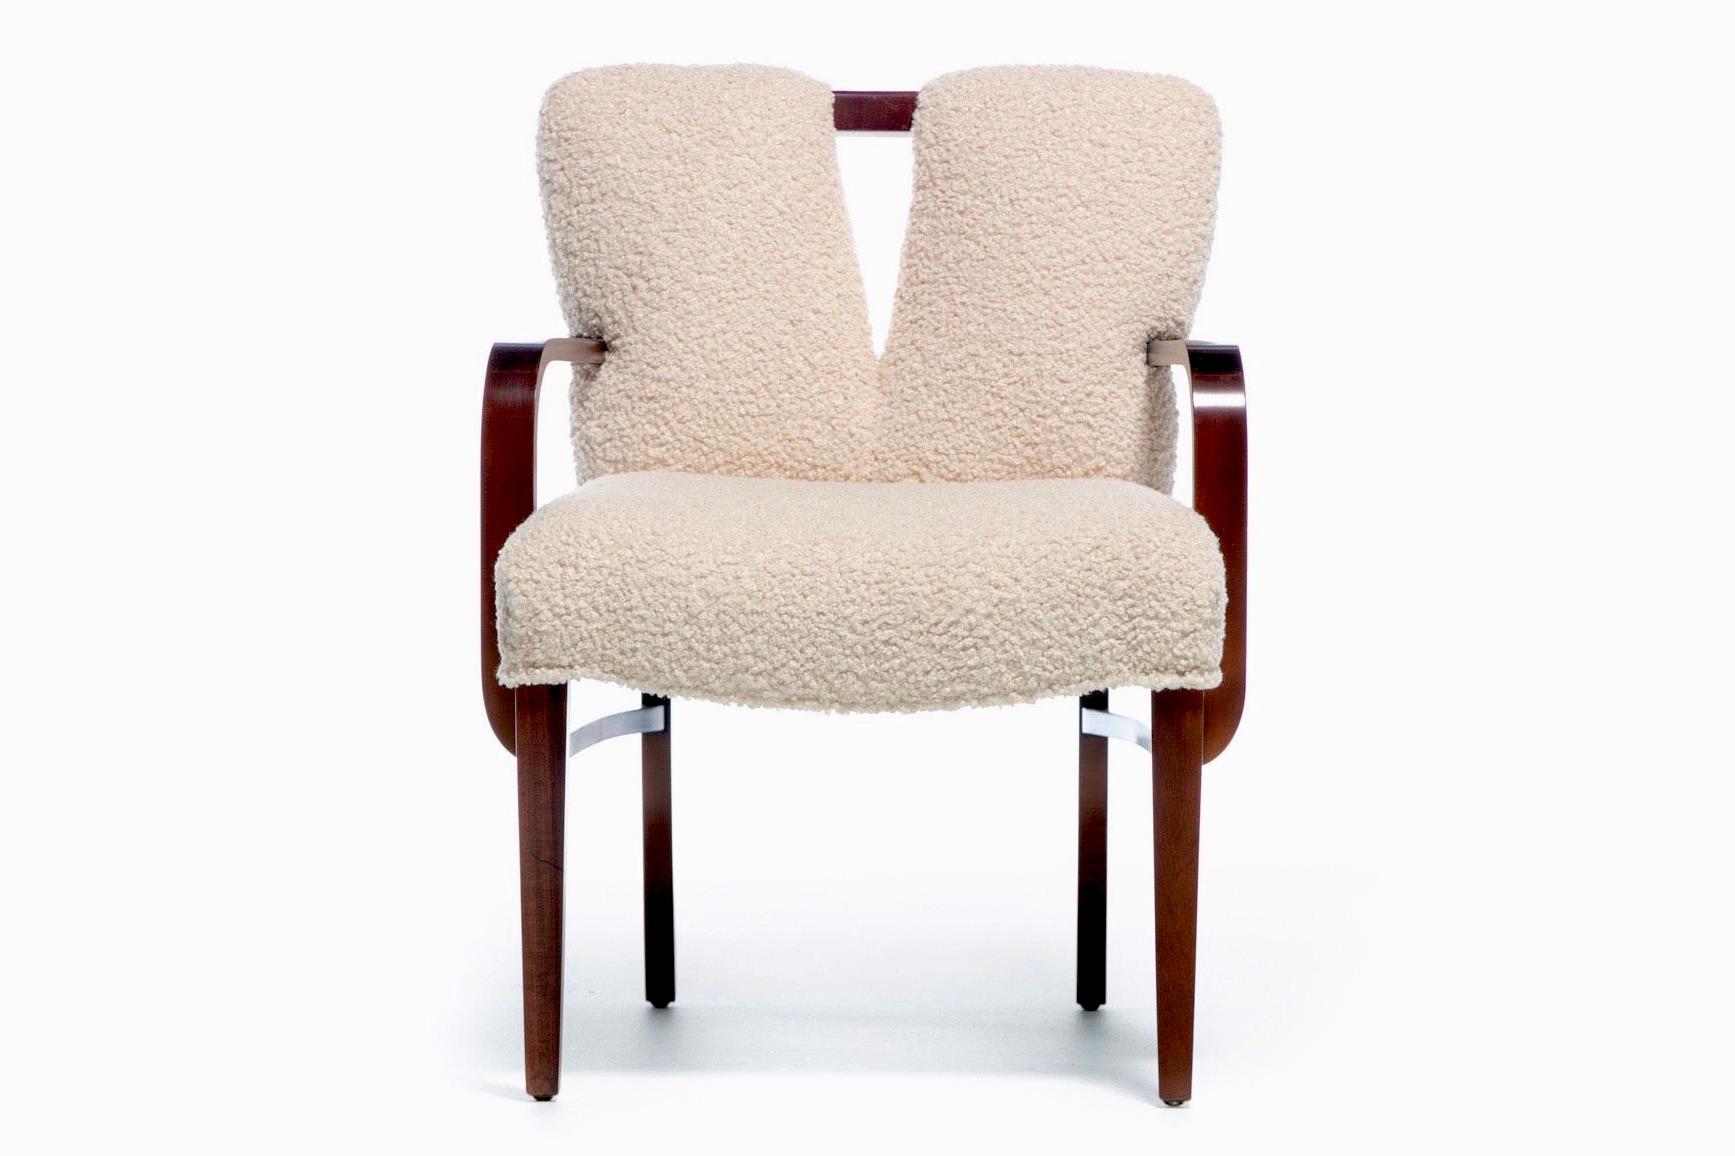 Exquisite set of eight freshly restained and reupholstered Paul Frankl Corset Back Armchairs in ivory white bouclé. Surprisingly practical and comfortable, the seat back cut out allows for ventilation and keeps your guests cool and comfortable